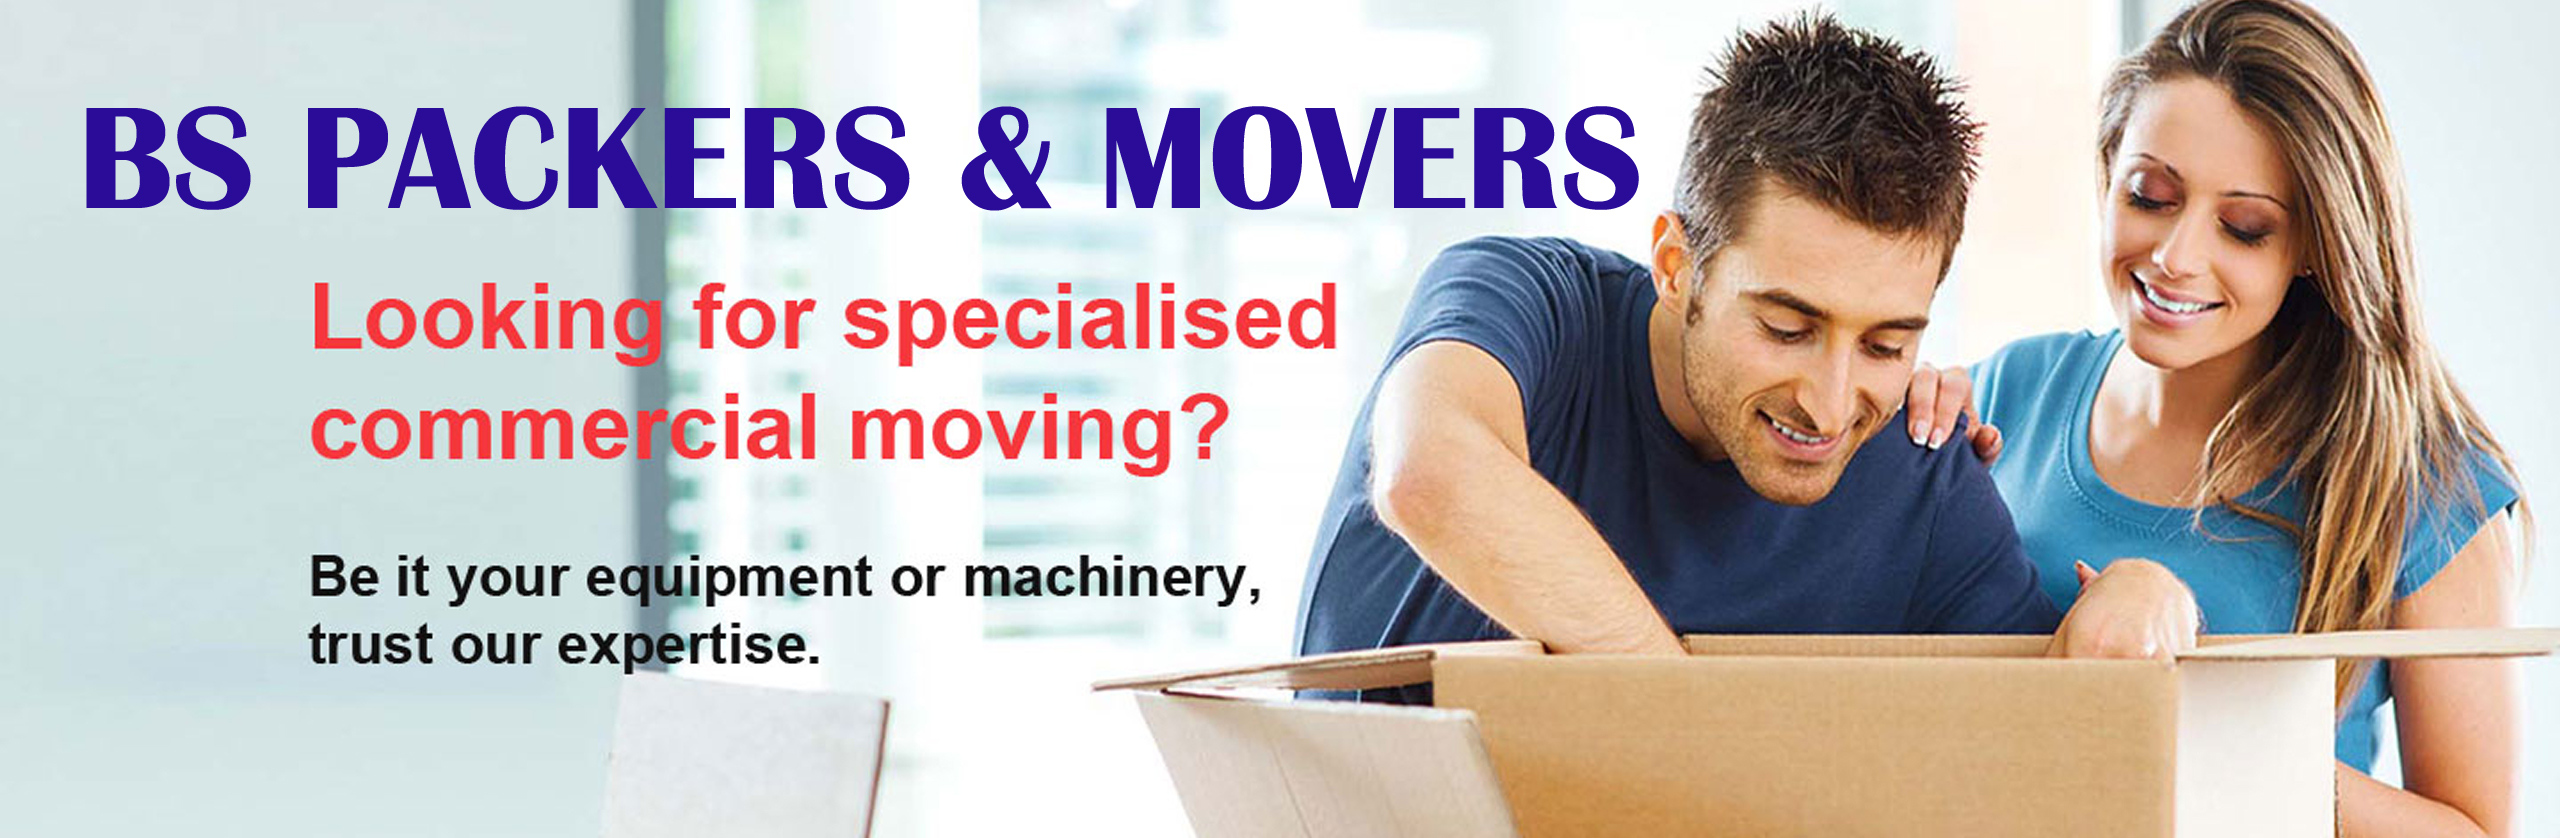 BS Packers and movers noida Banner